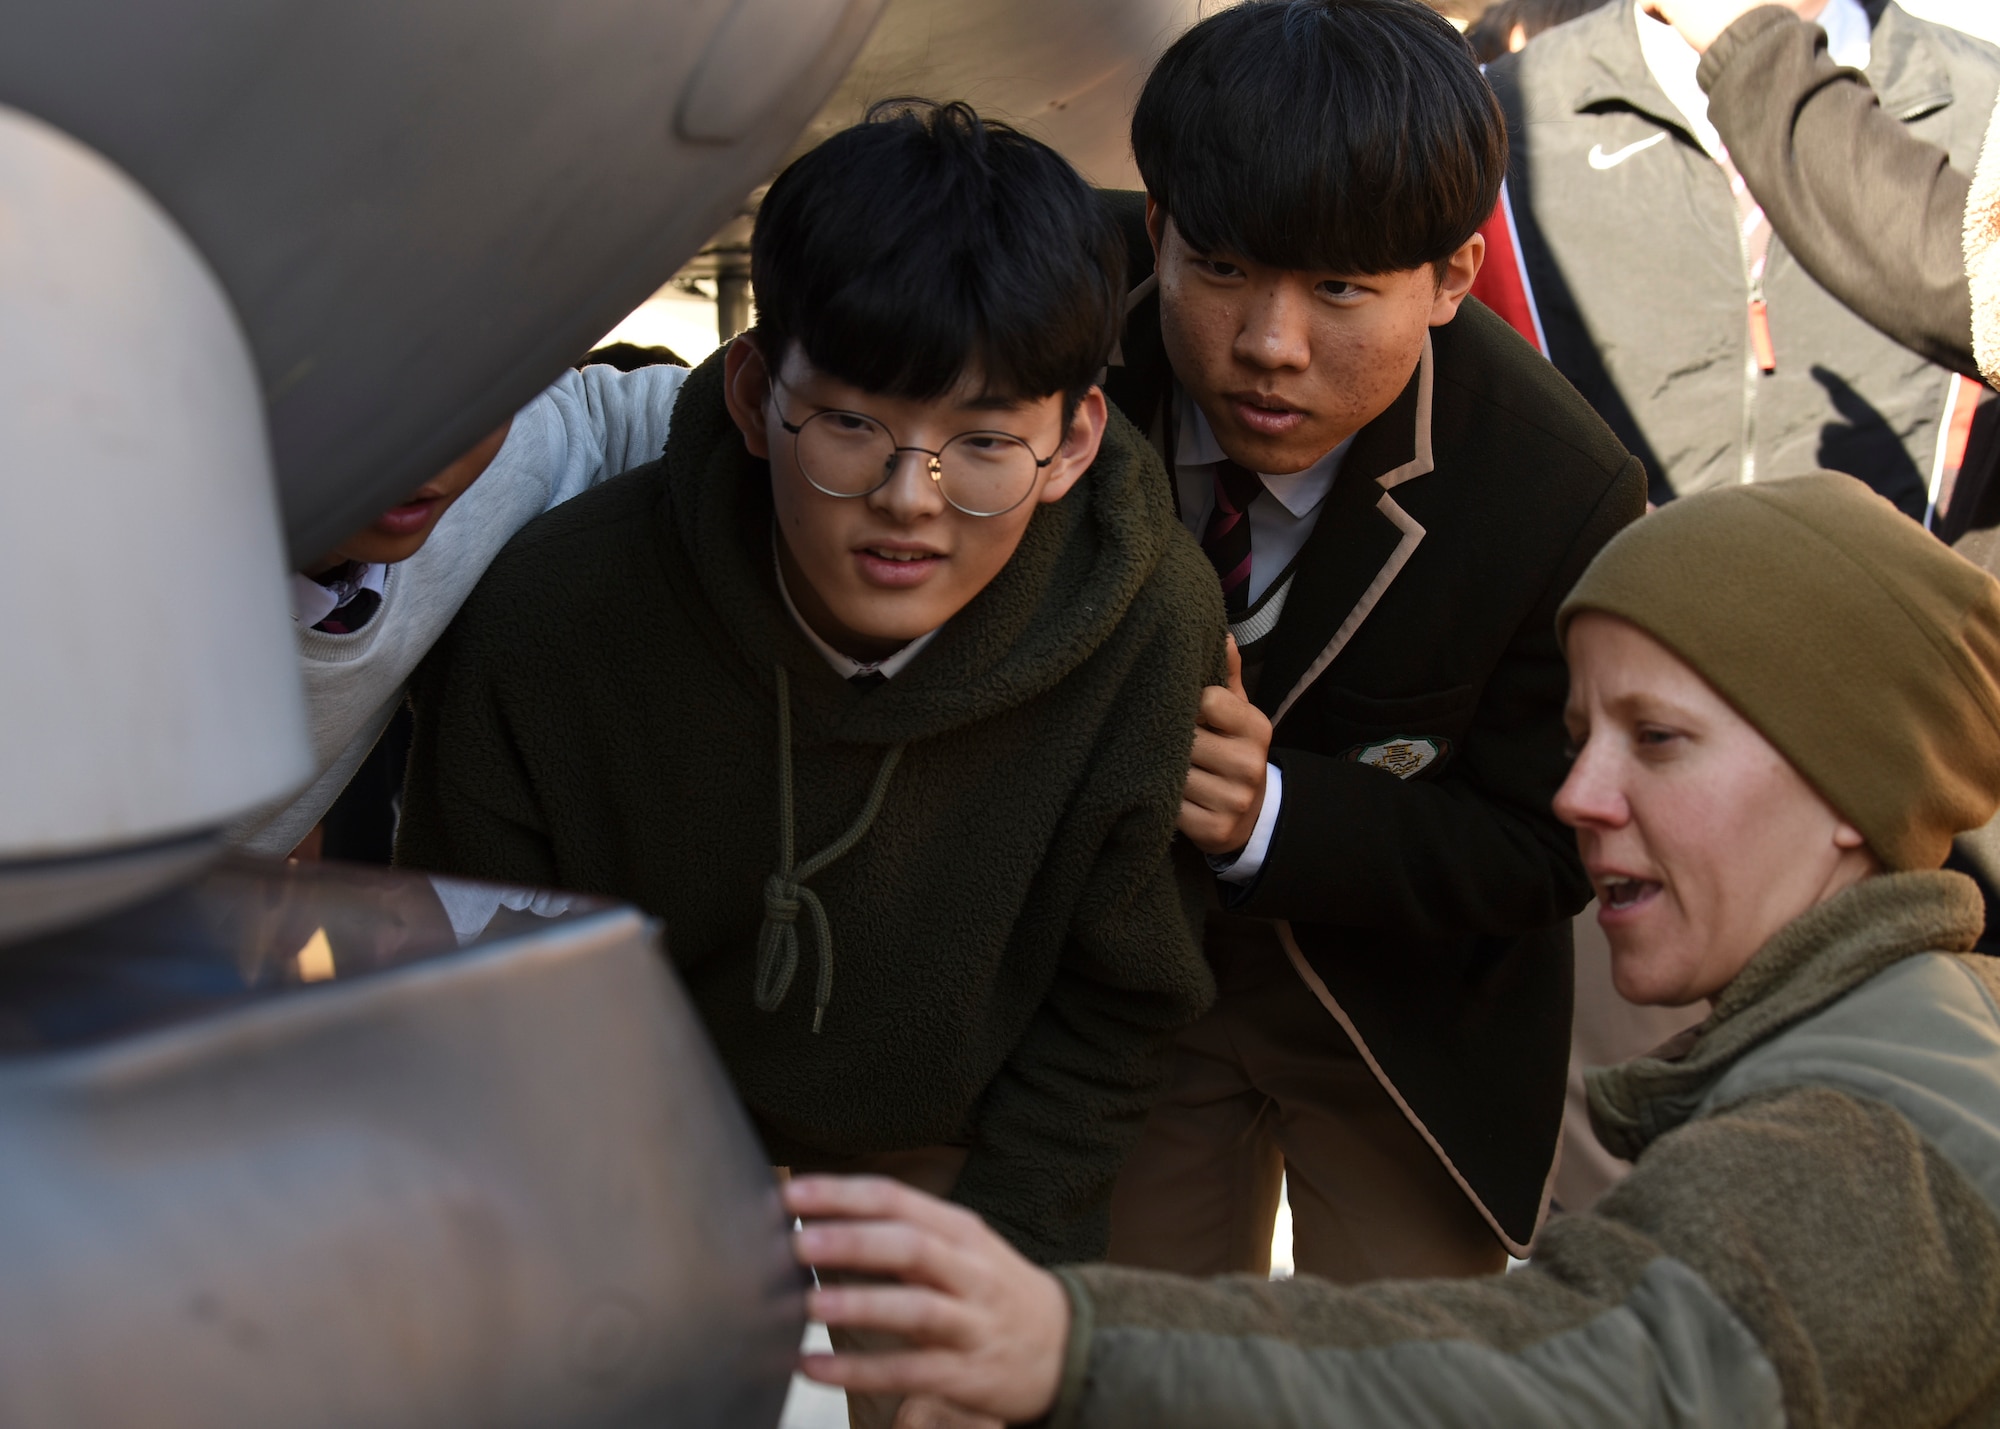 U.S. Air Force Tech. Sgt. Sarah Allen, 35th Aircraft Maintenance Unit electric and environmental craftsman, tells students from Gunsan Dong High School about the capabilities of the F-16 Fighting Falcon during a tour at Kunsan Air Base, Republic of Korea, Nov. 8, 2019. This was the first time the students were able to visit Kunsan and get up close and personal with an F-16. (U.S. Air Force photo by Staff Sgt. Anthony Hetlage)